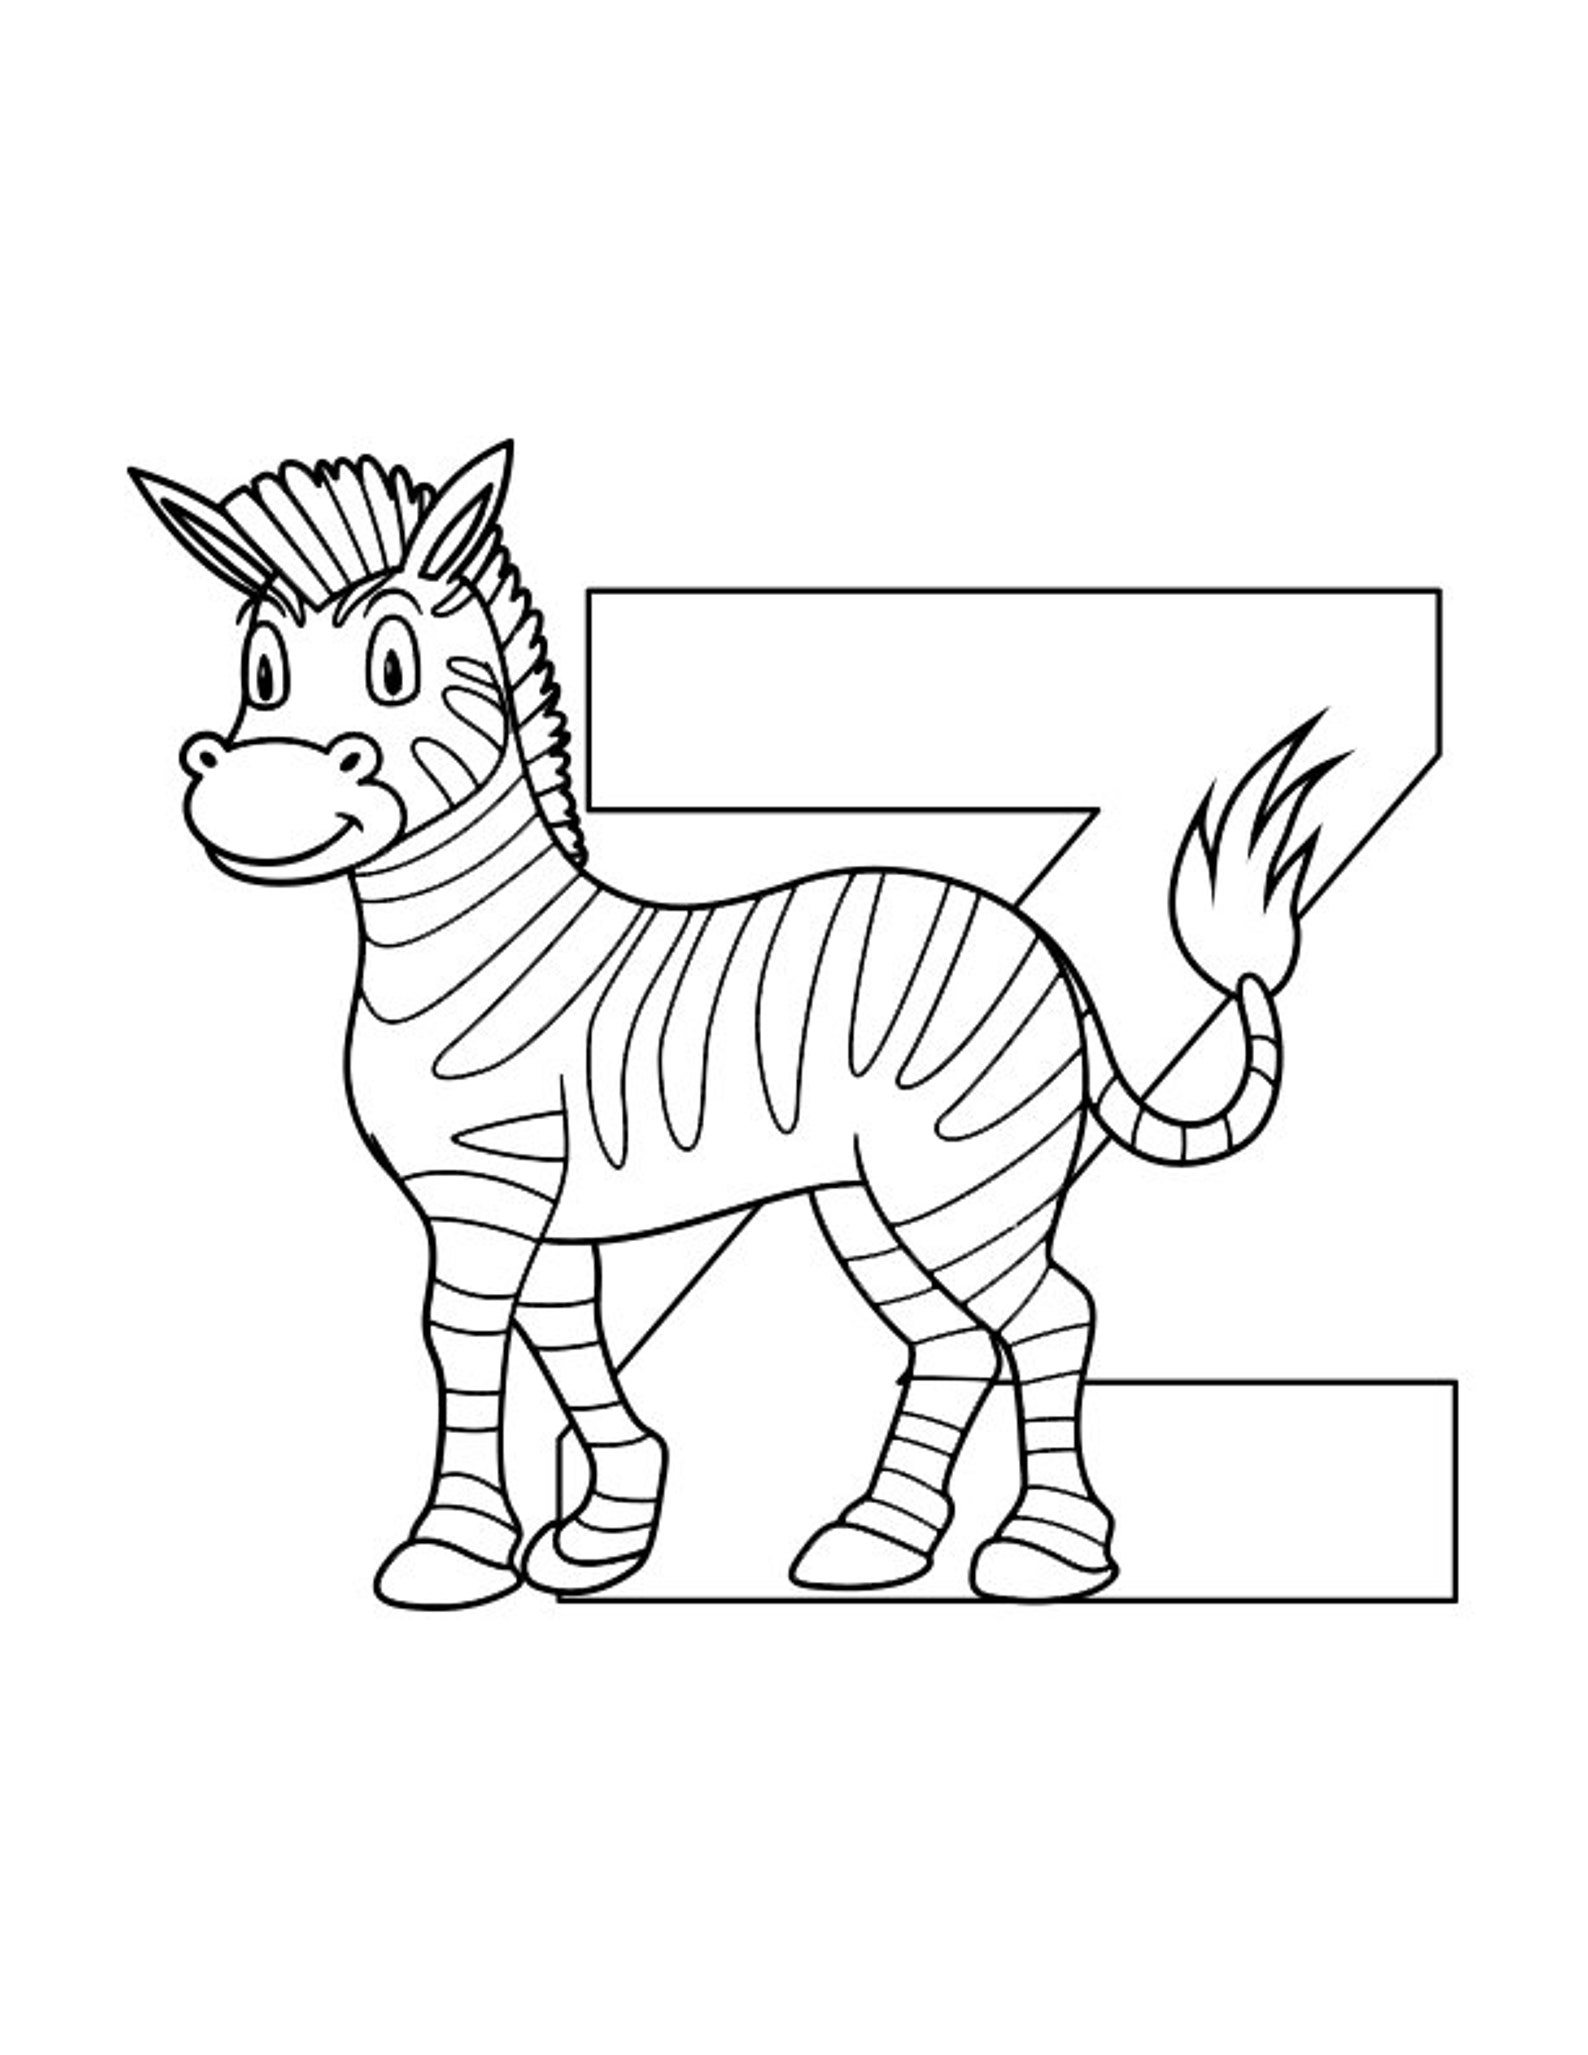 Download Zoo Animal Alphabet Coloring Pages | Etsy